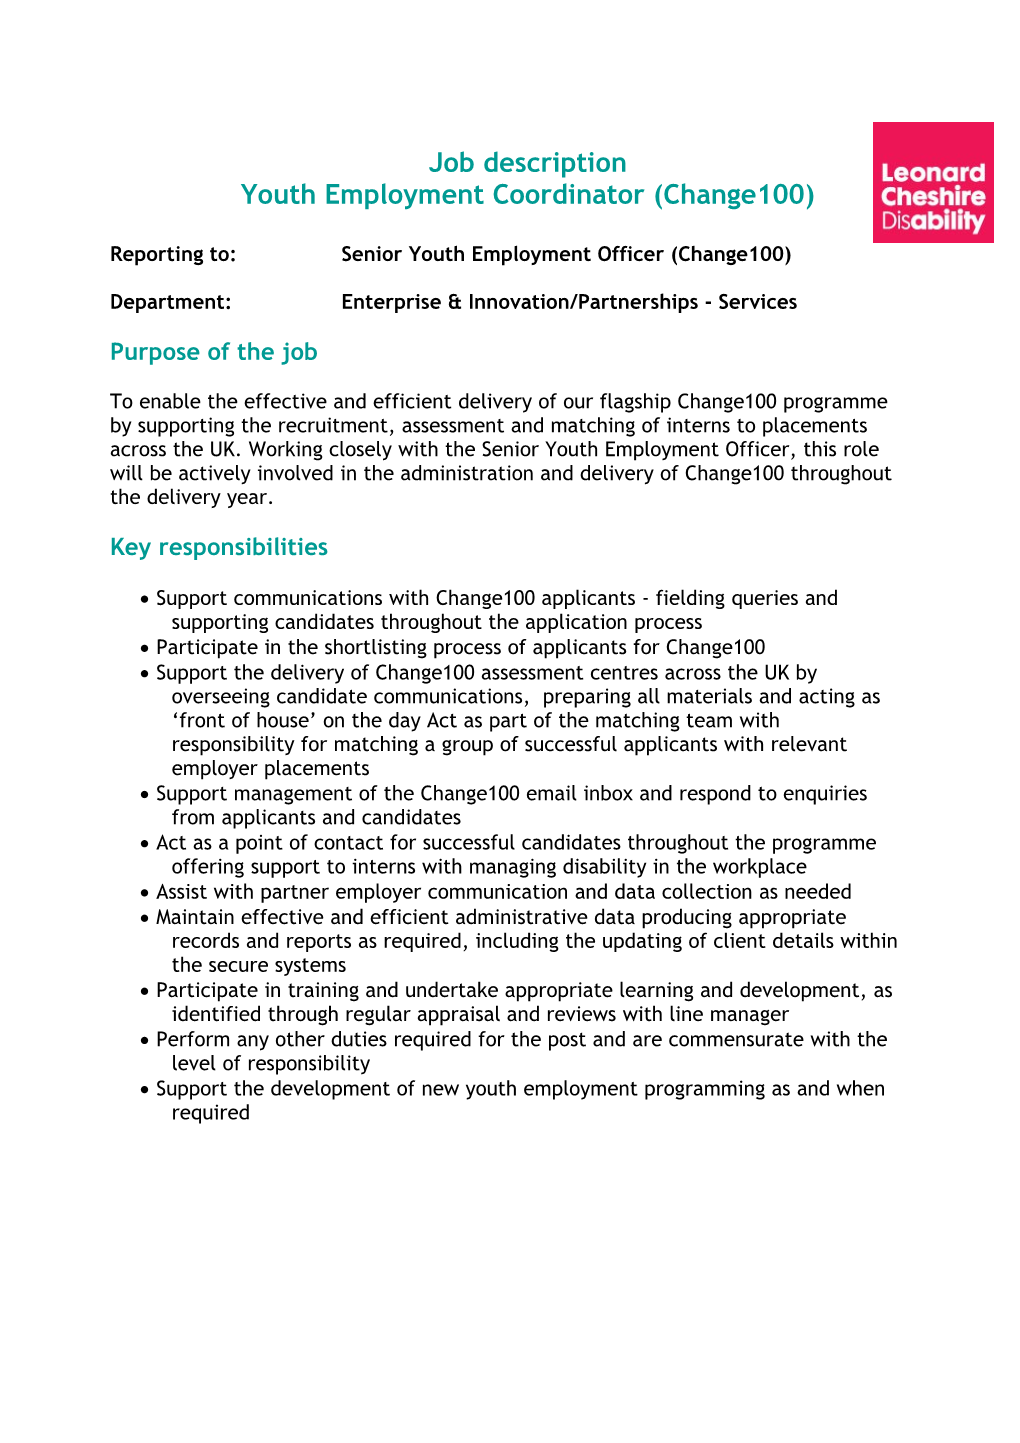 Reporting To:Senior Youth Employment Officer (Change100)